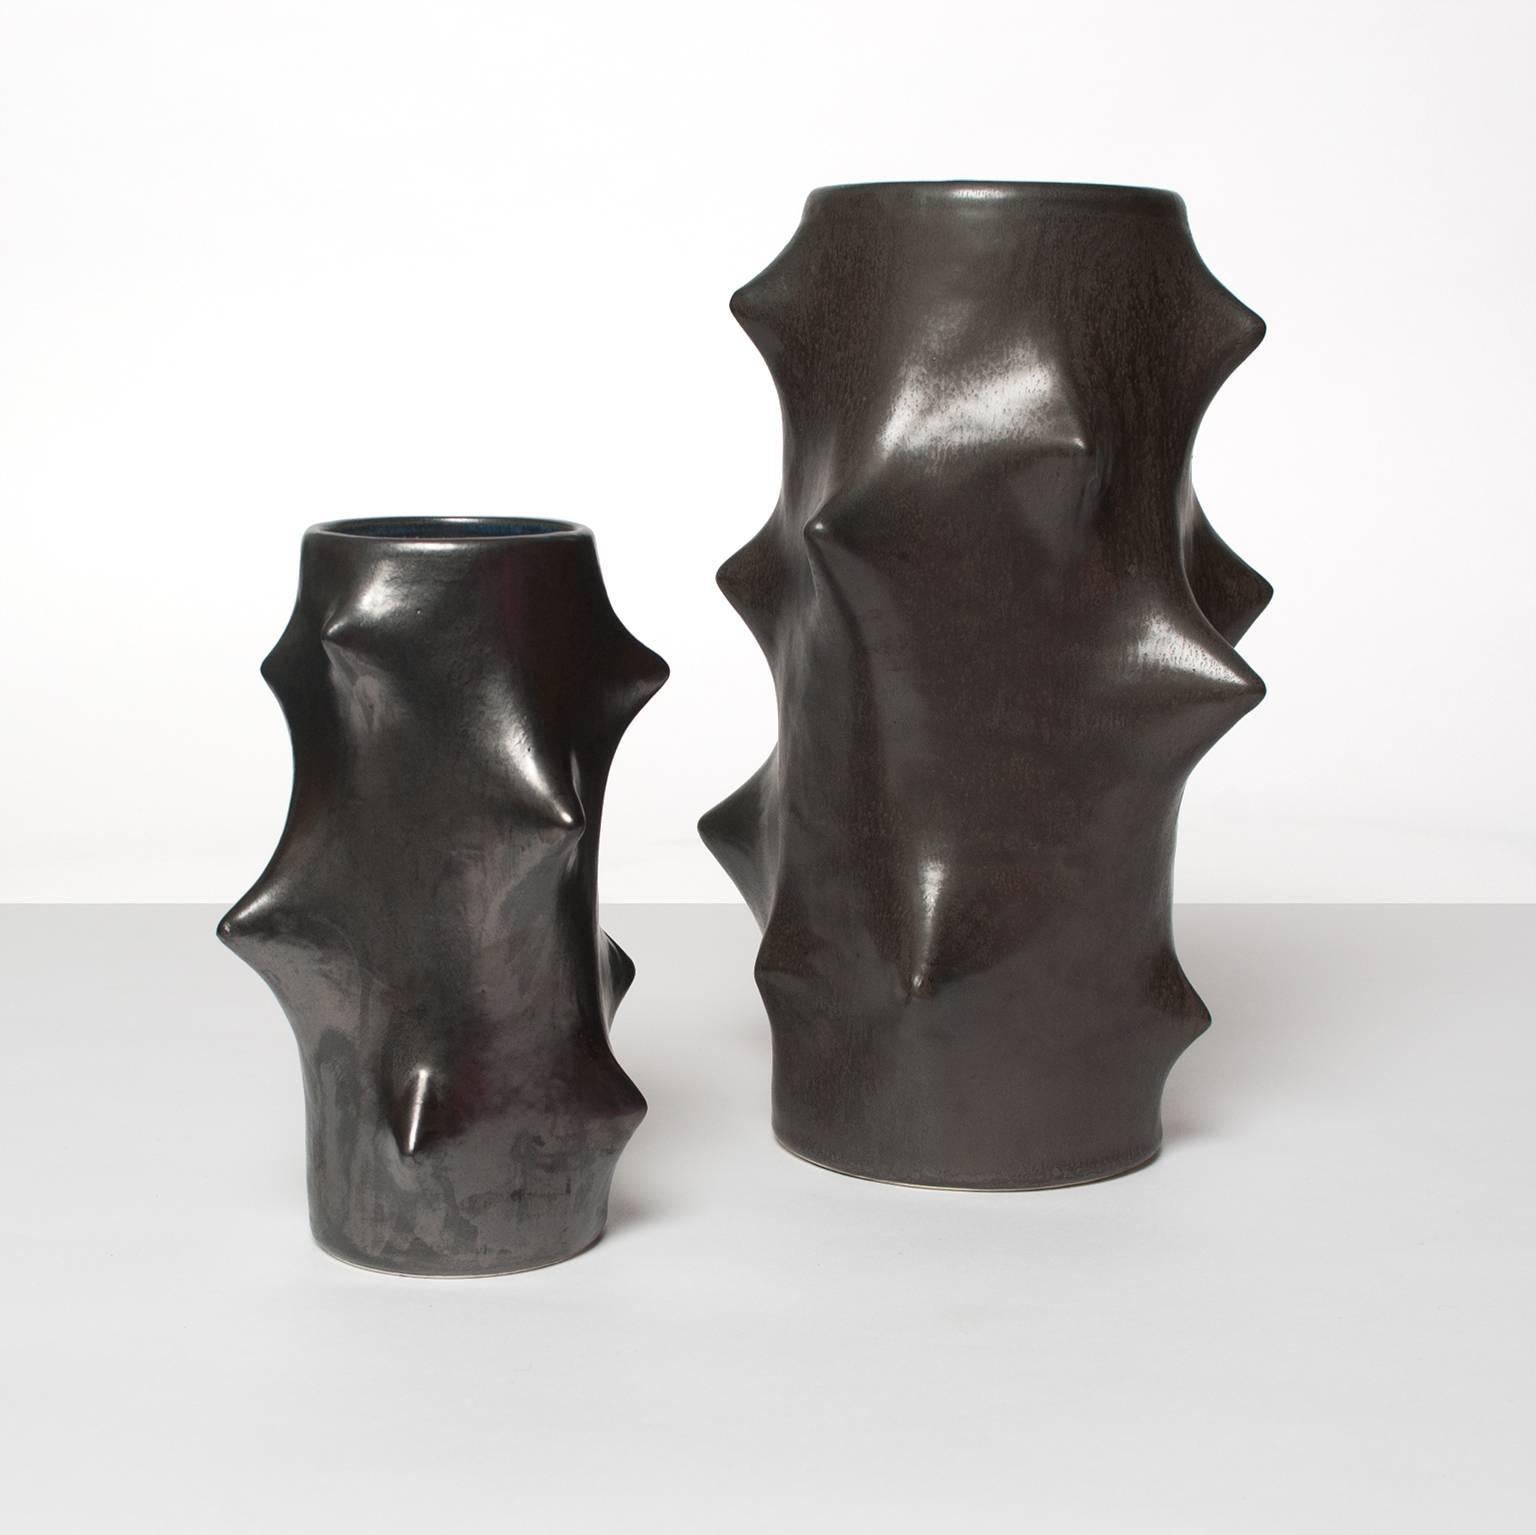 One large and one smaller Scandinavian modern ceramic vases by Knud Basse for Michael Andersen & Sons. These 